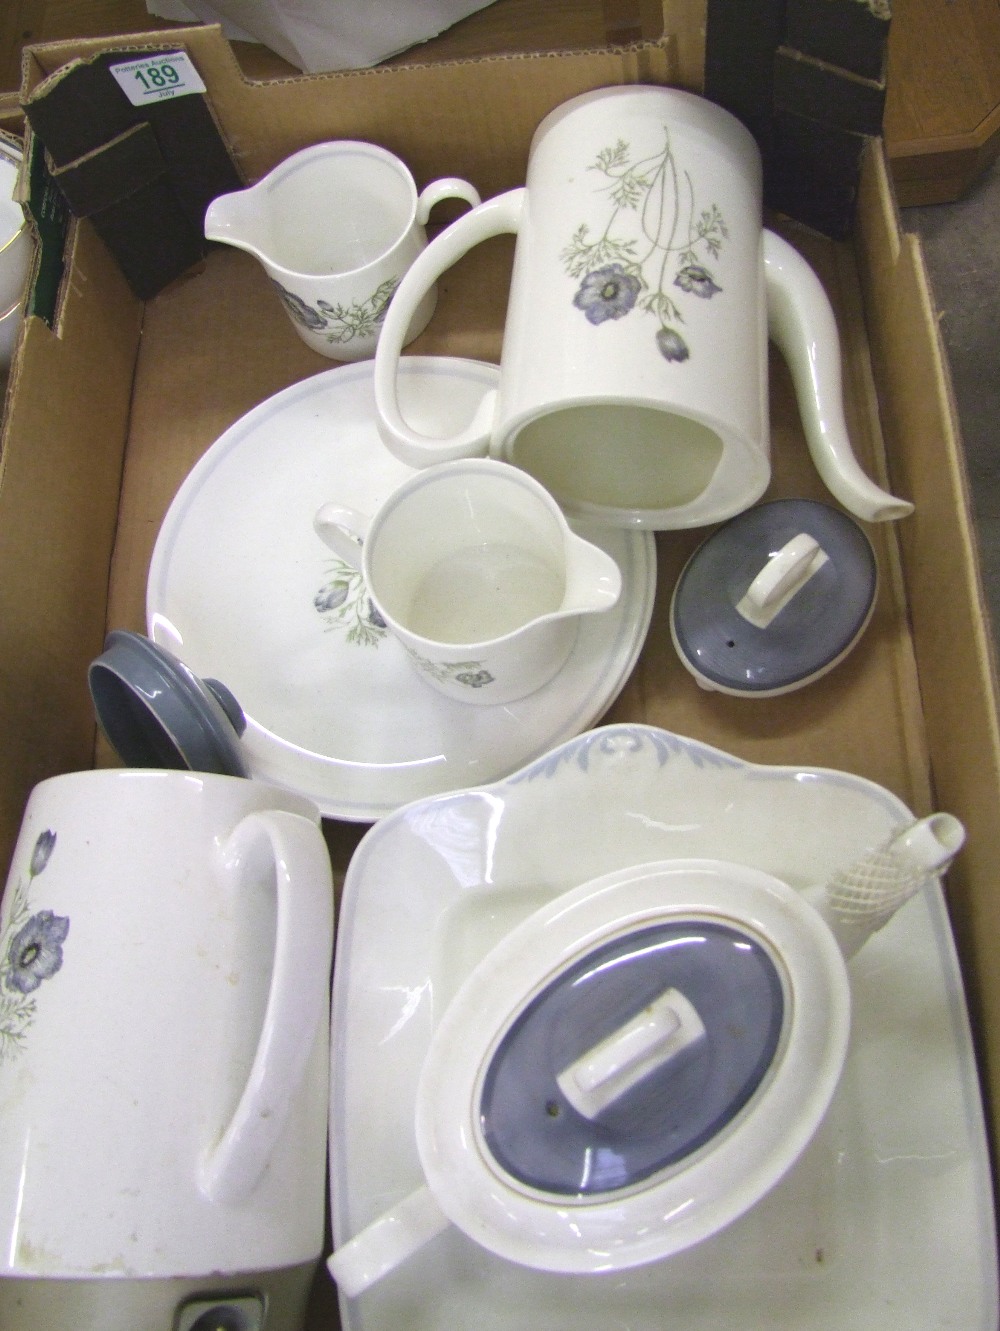 A collection of Wedgwood teaware in the Susie Coop